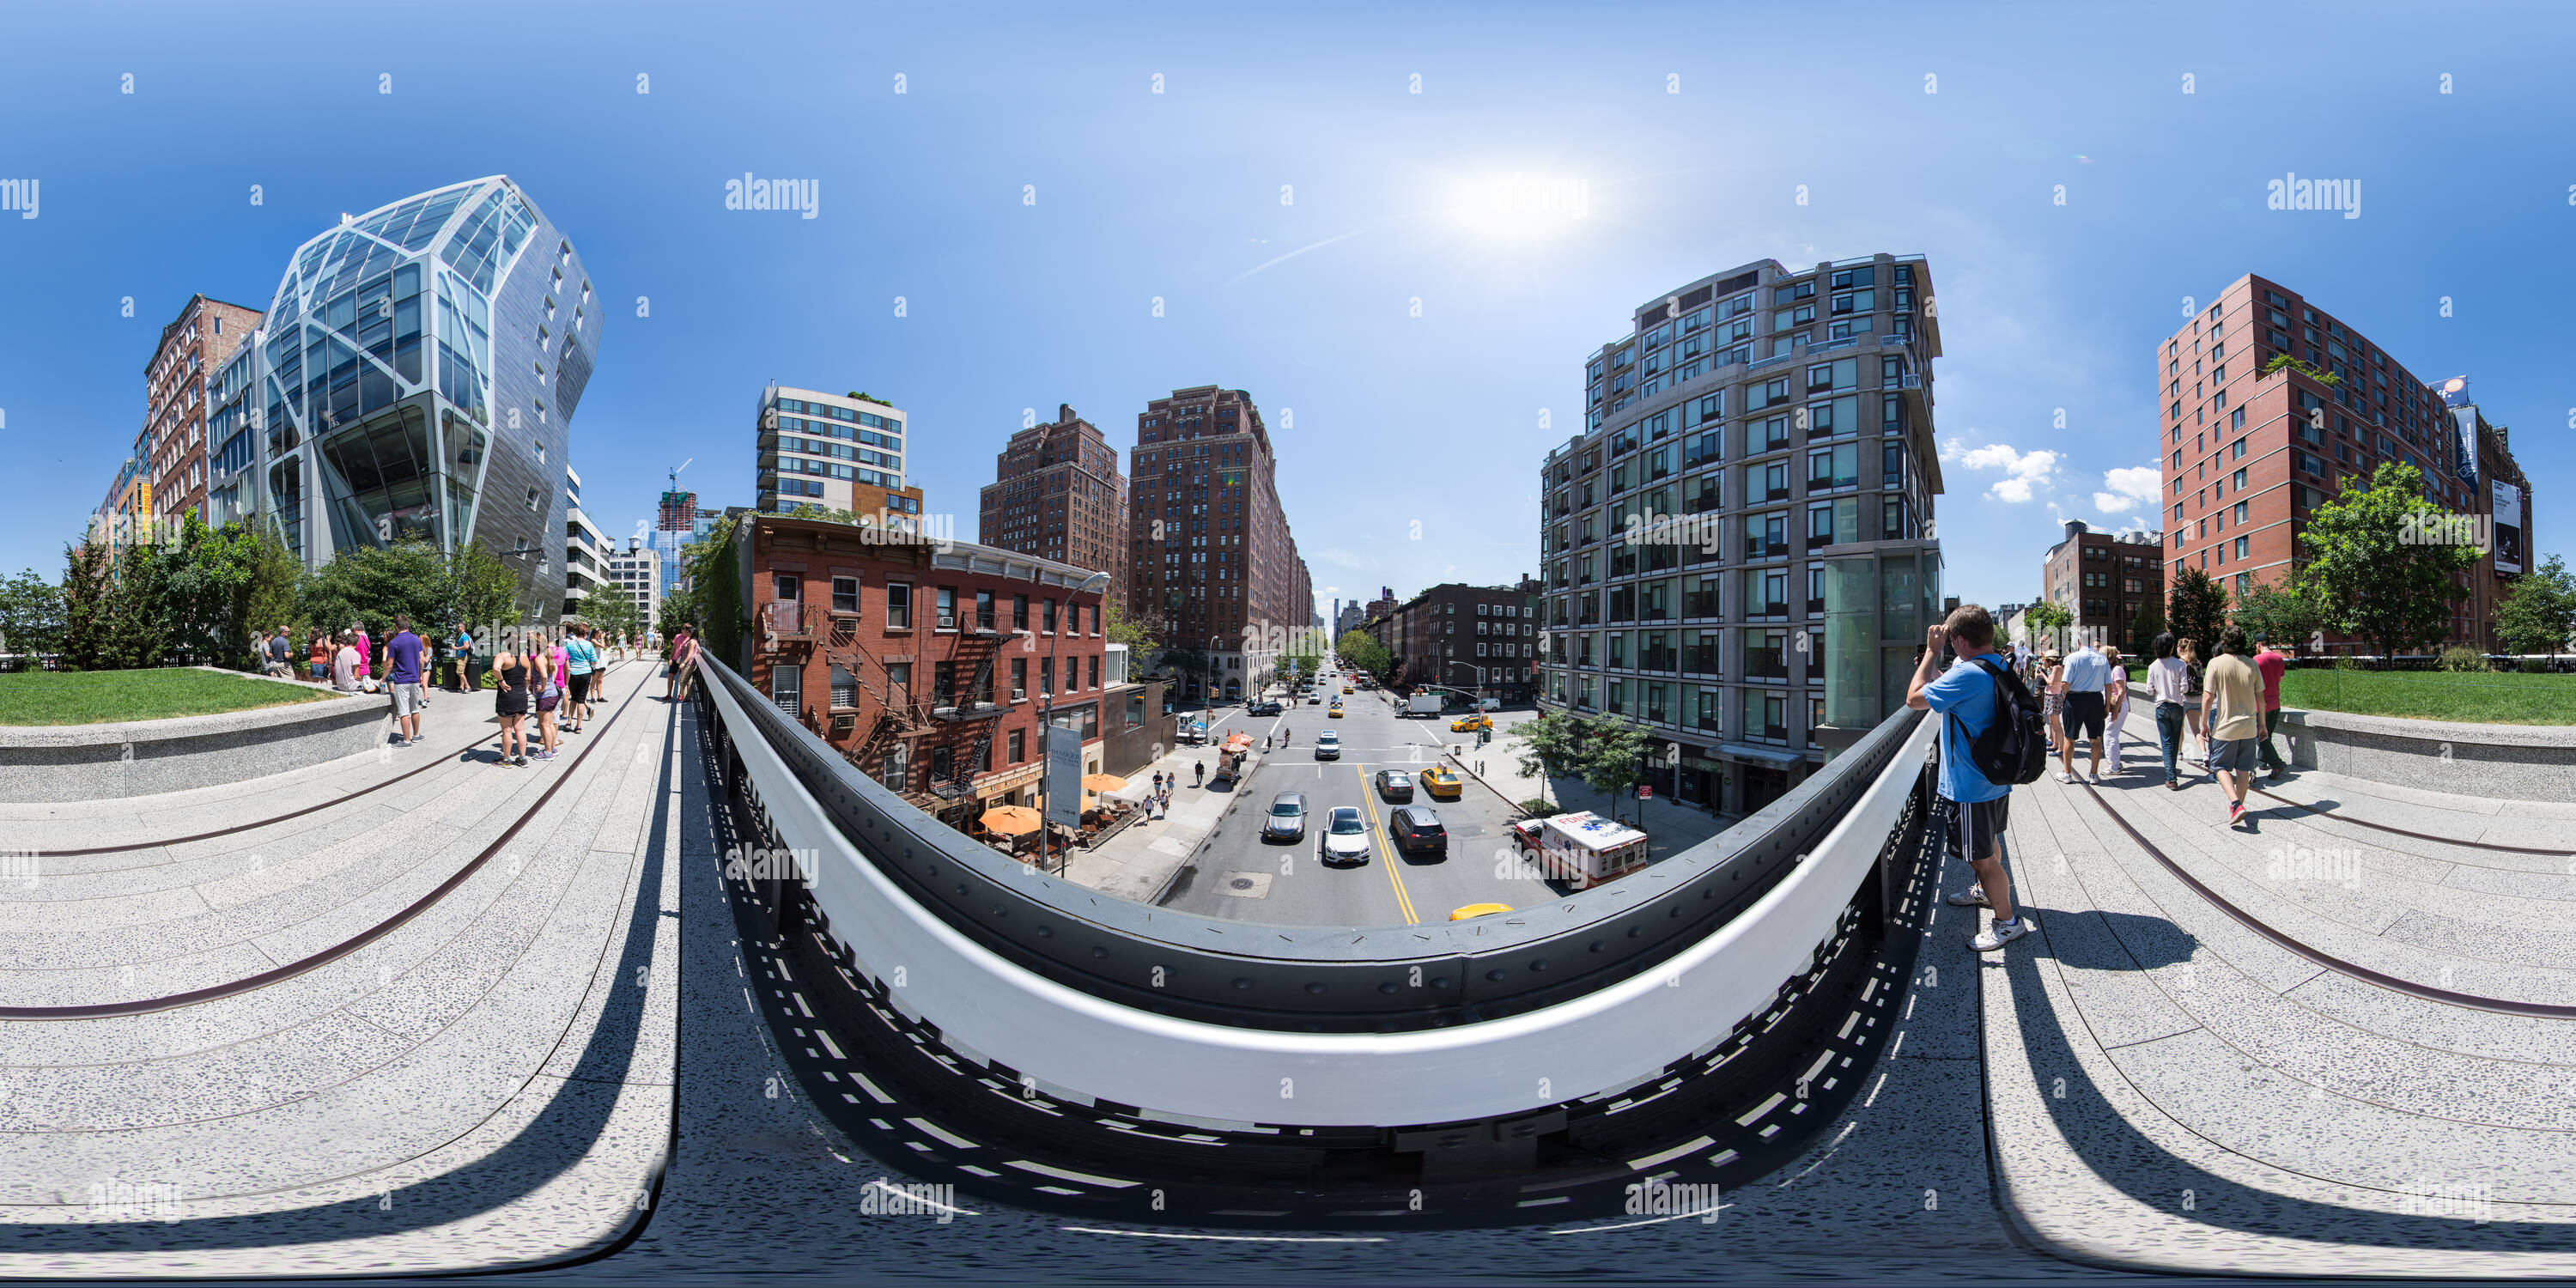 360-view-of-new-york-city-high-line-at-w23rd-st-alamy